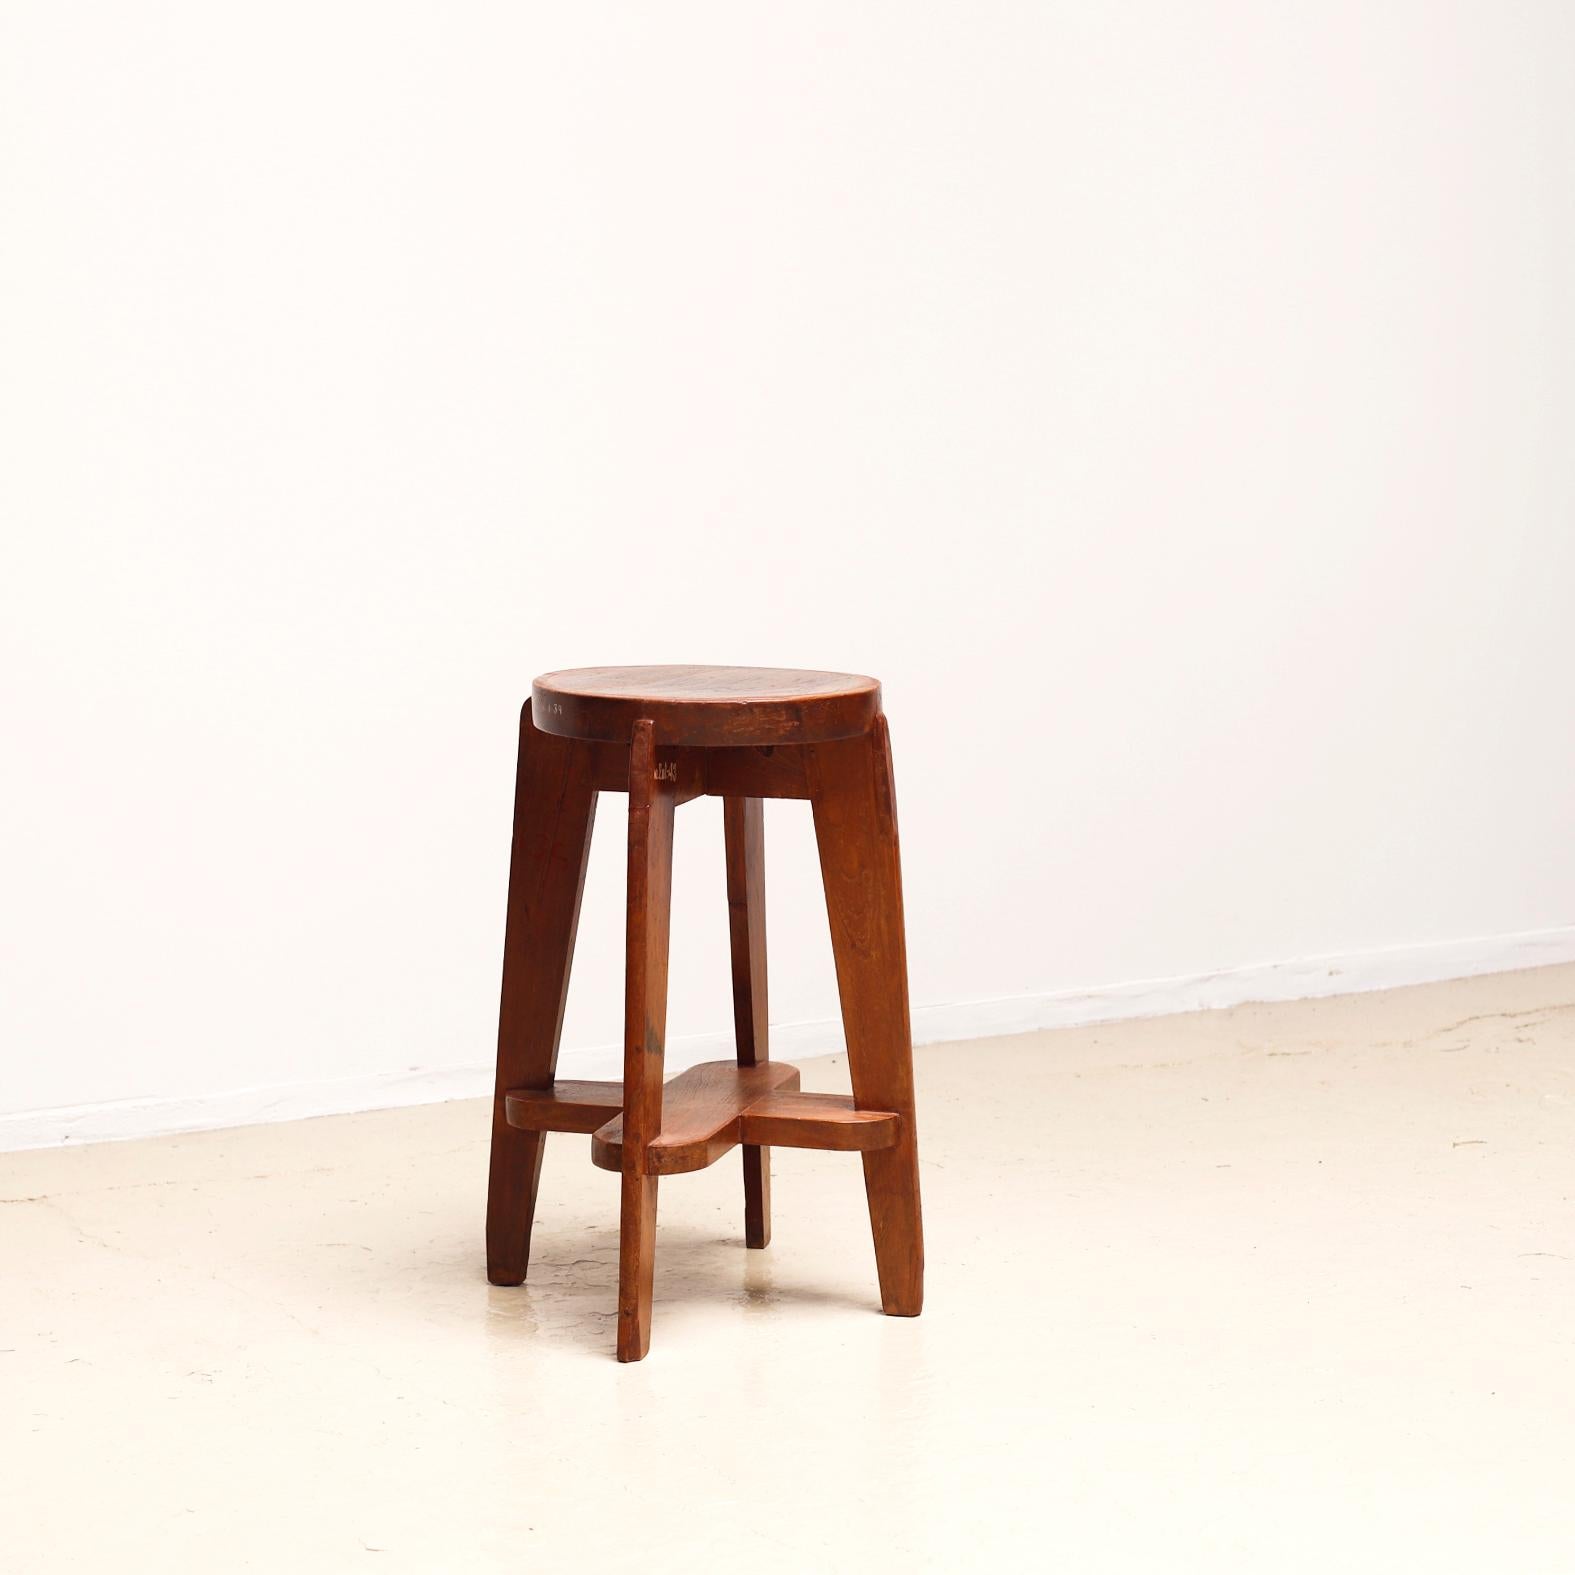 Teak high stool designed for Chandigarh project circa 1950s by Pierre Jeanneret.